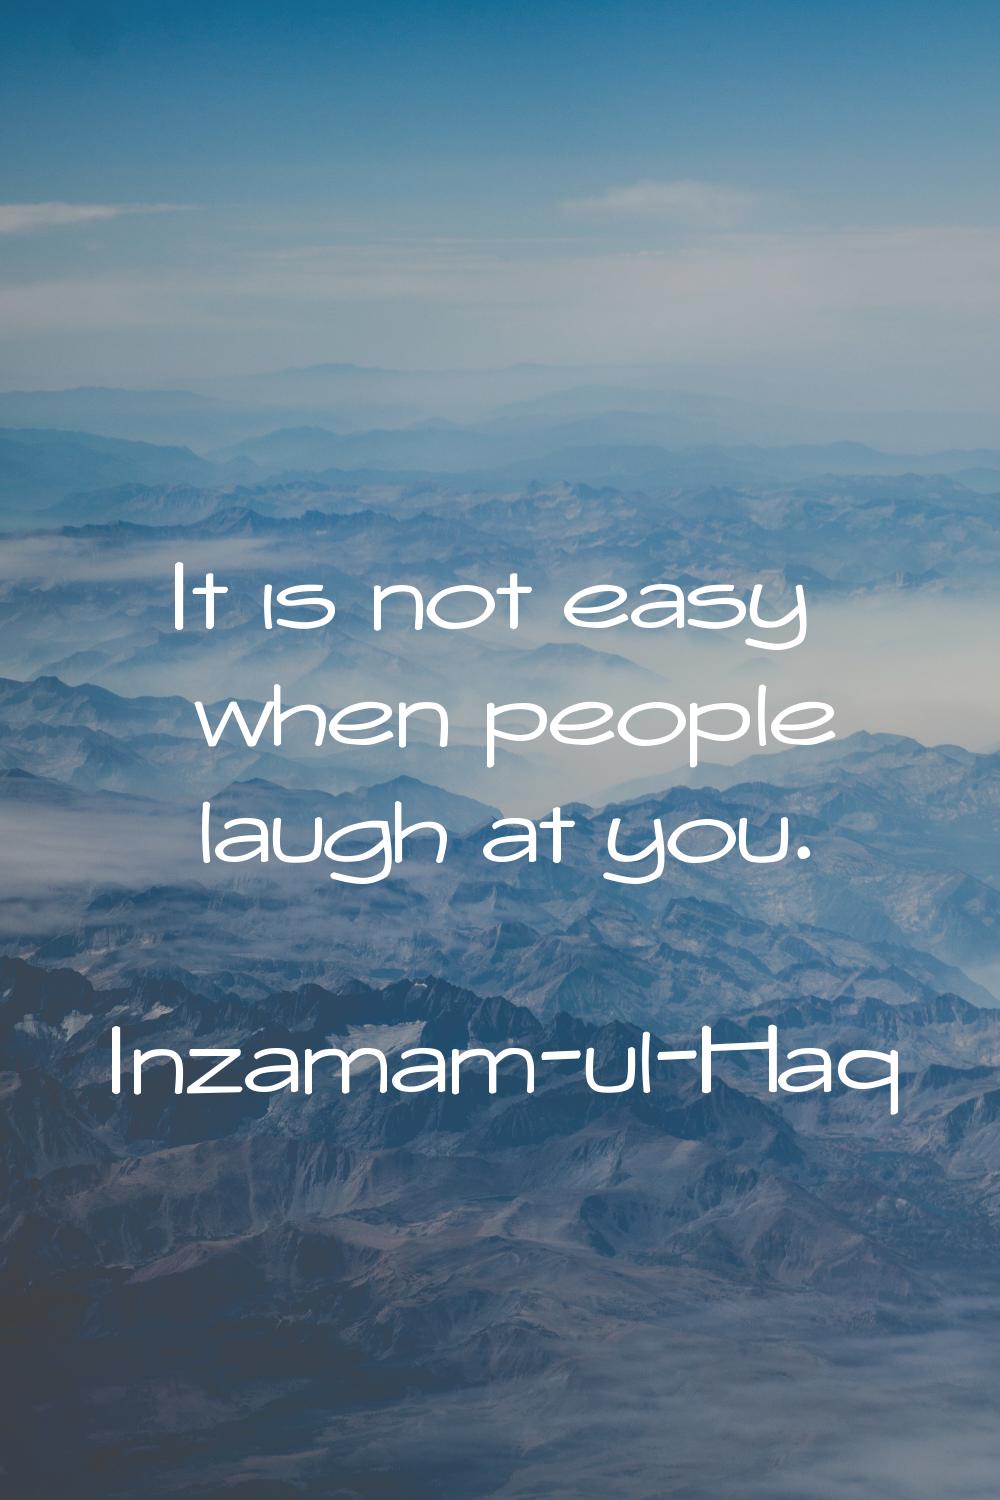 It is not easy when people laugh at you.